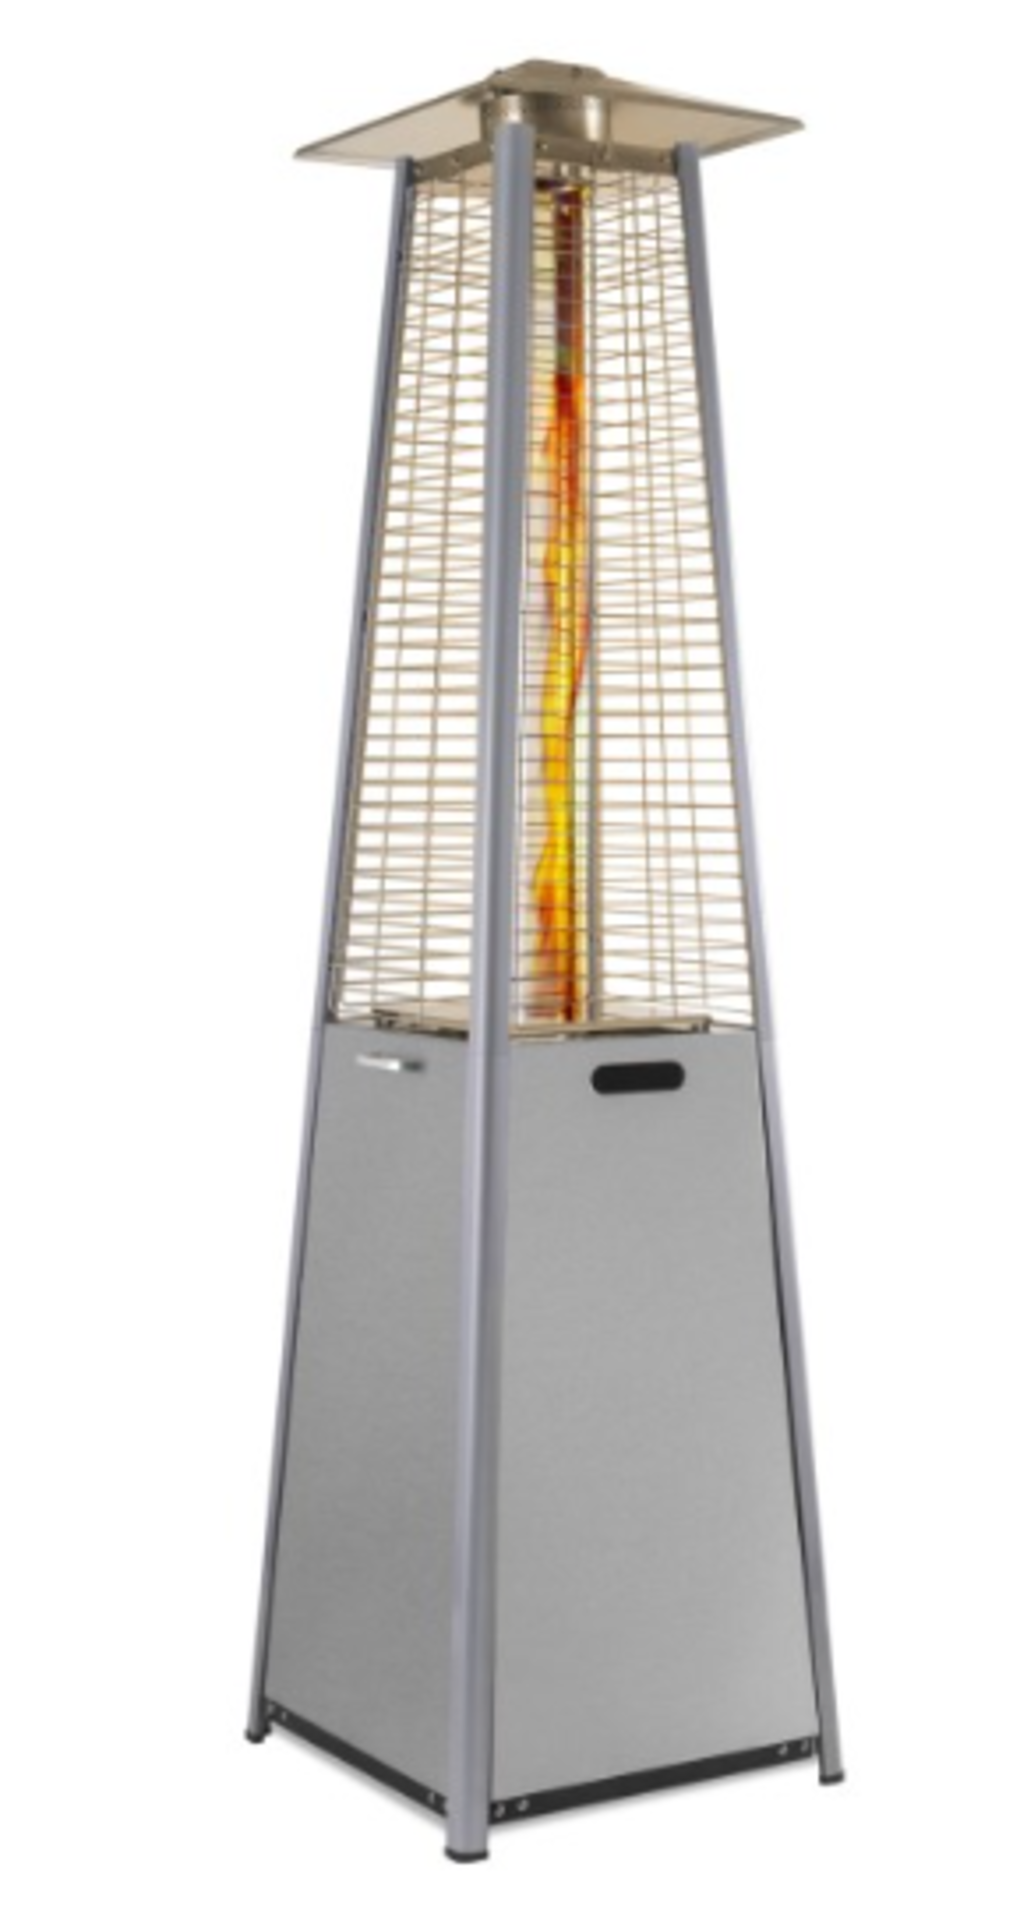 Hiland - Commericial Glass Tube Patio Heater - Hammered Silver Finish ( 234cm Tall X 66cm Base - Image 2 of 2